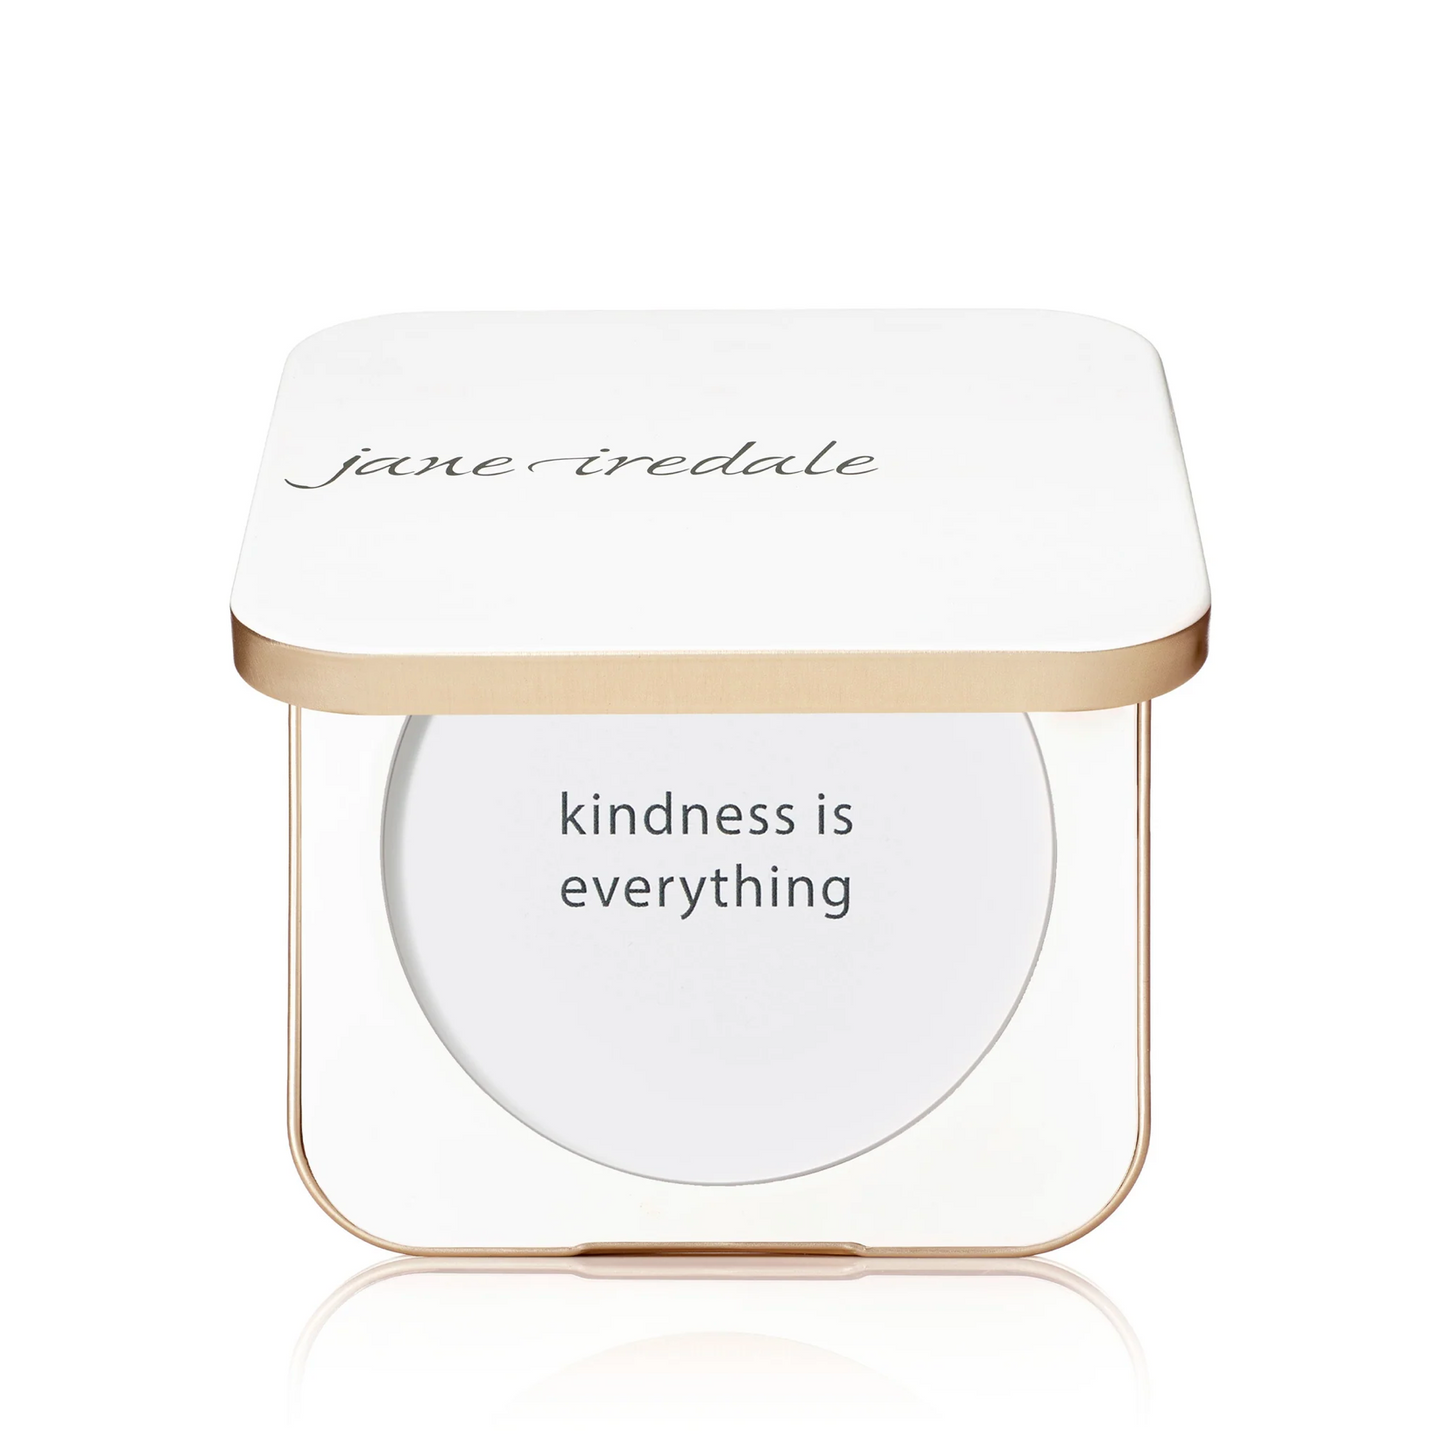 Jane Iredale - Refillable Compact